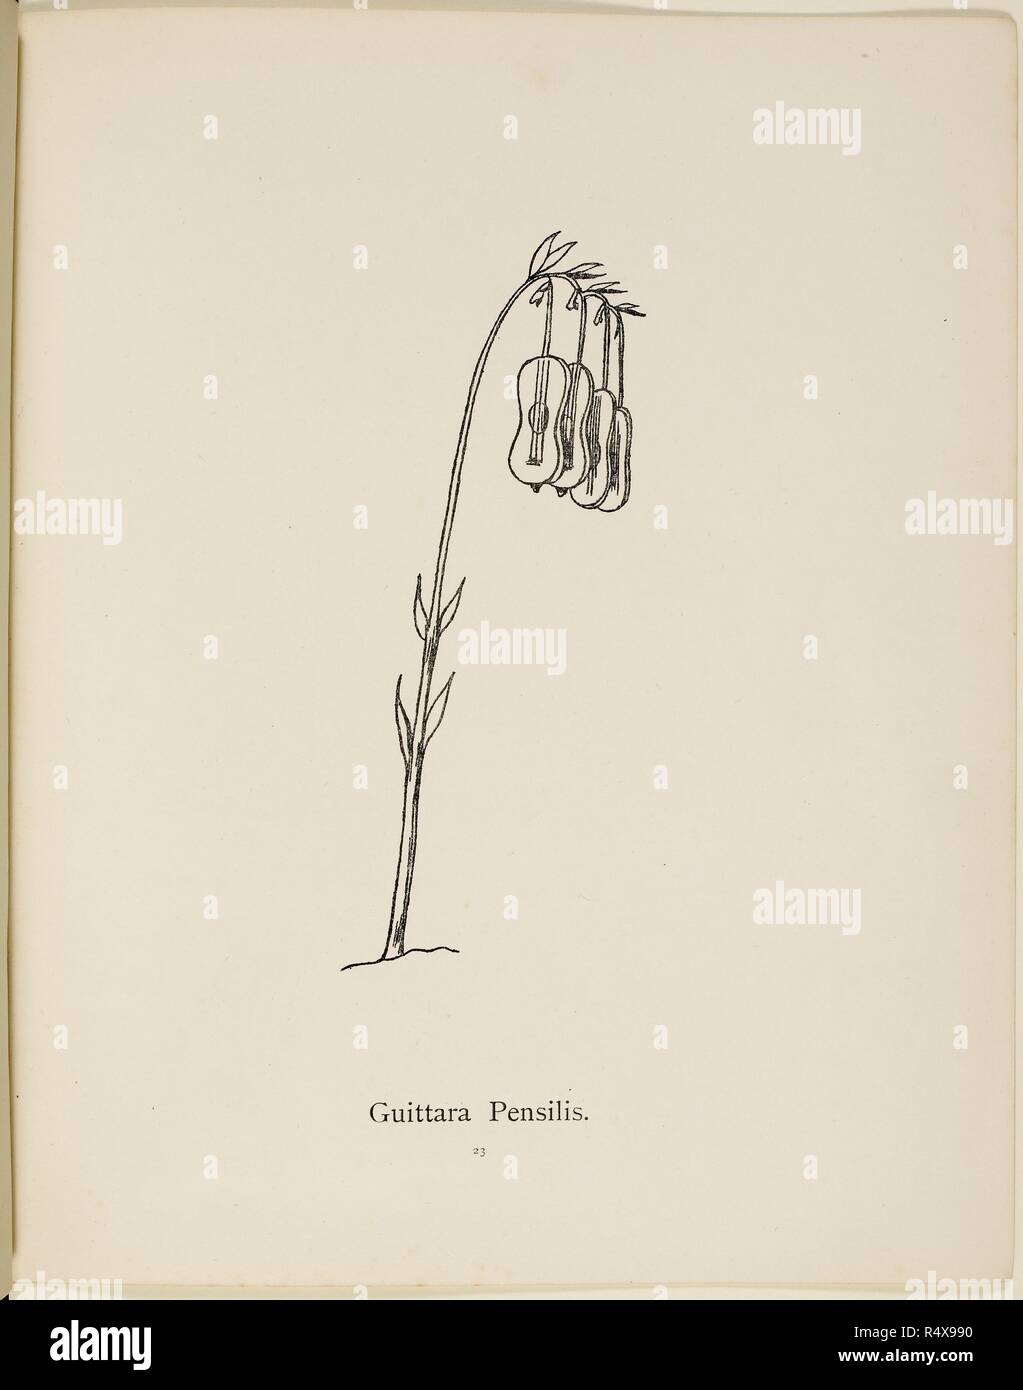 Fictional plant: 'Guittara Pensilis'. Illustration from Nonsense Botany by Edward Lear, published in 1889. . Nonsense Botany, and Nonsense Alphabets, Fifth edition. Frederick Warne & Co.: London & New York, 1889. Source: Cup.400.a.42 23. Stock Photo